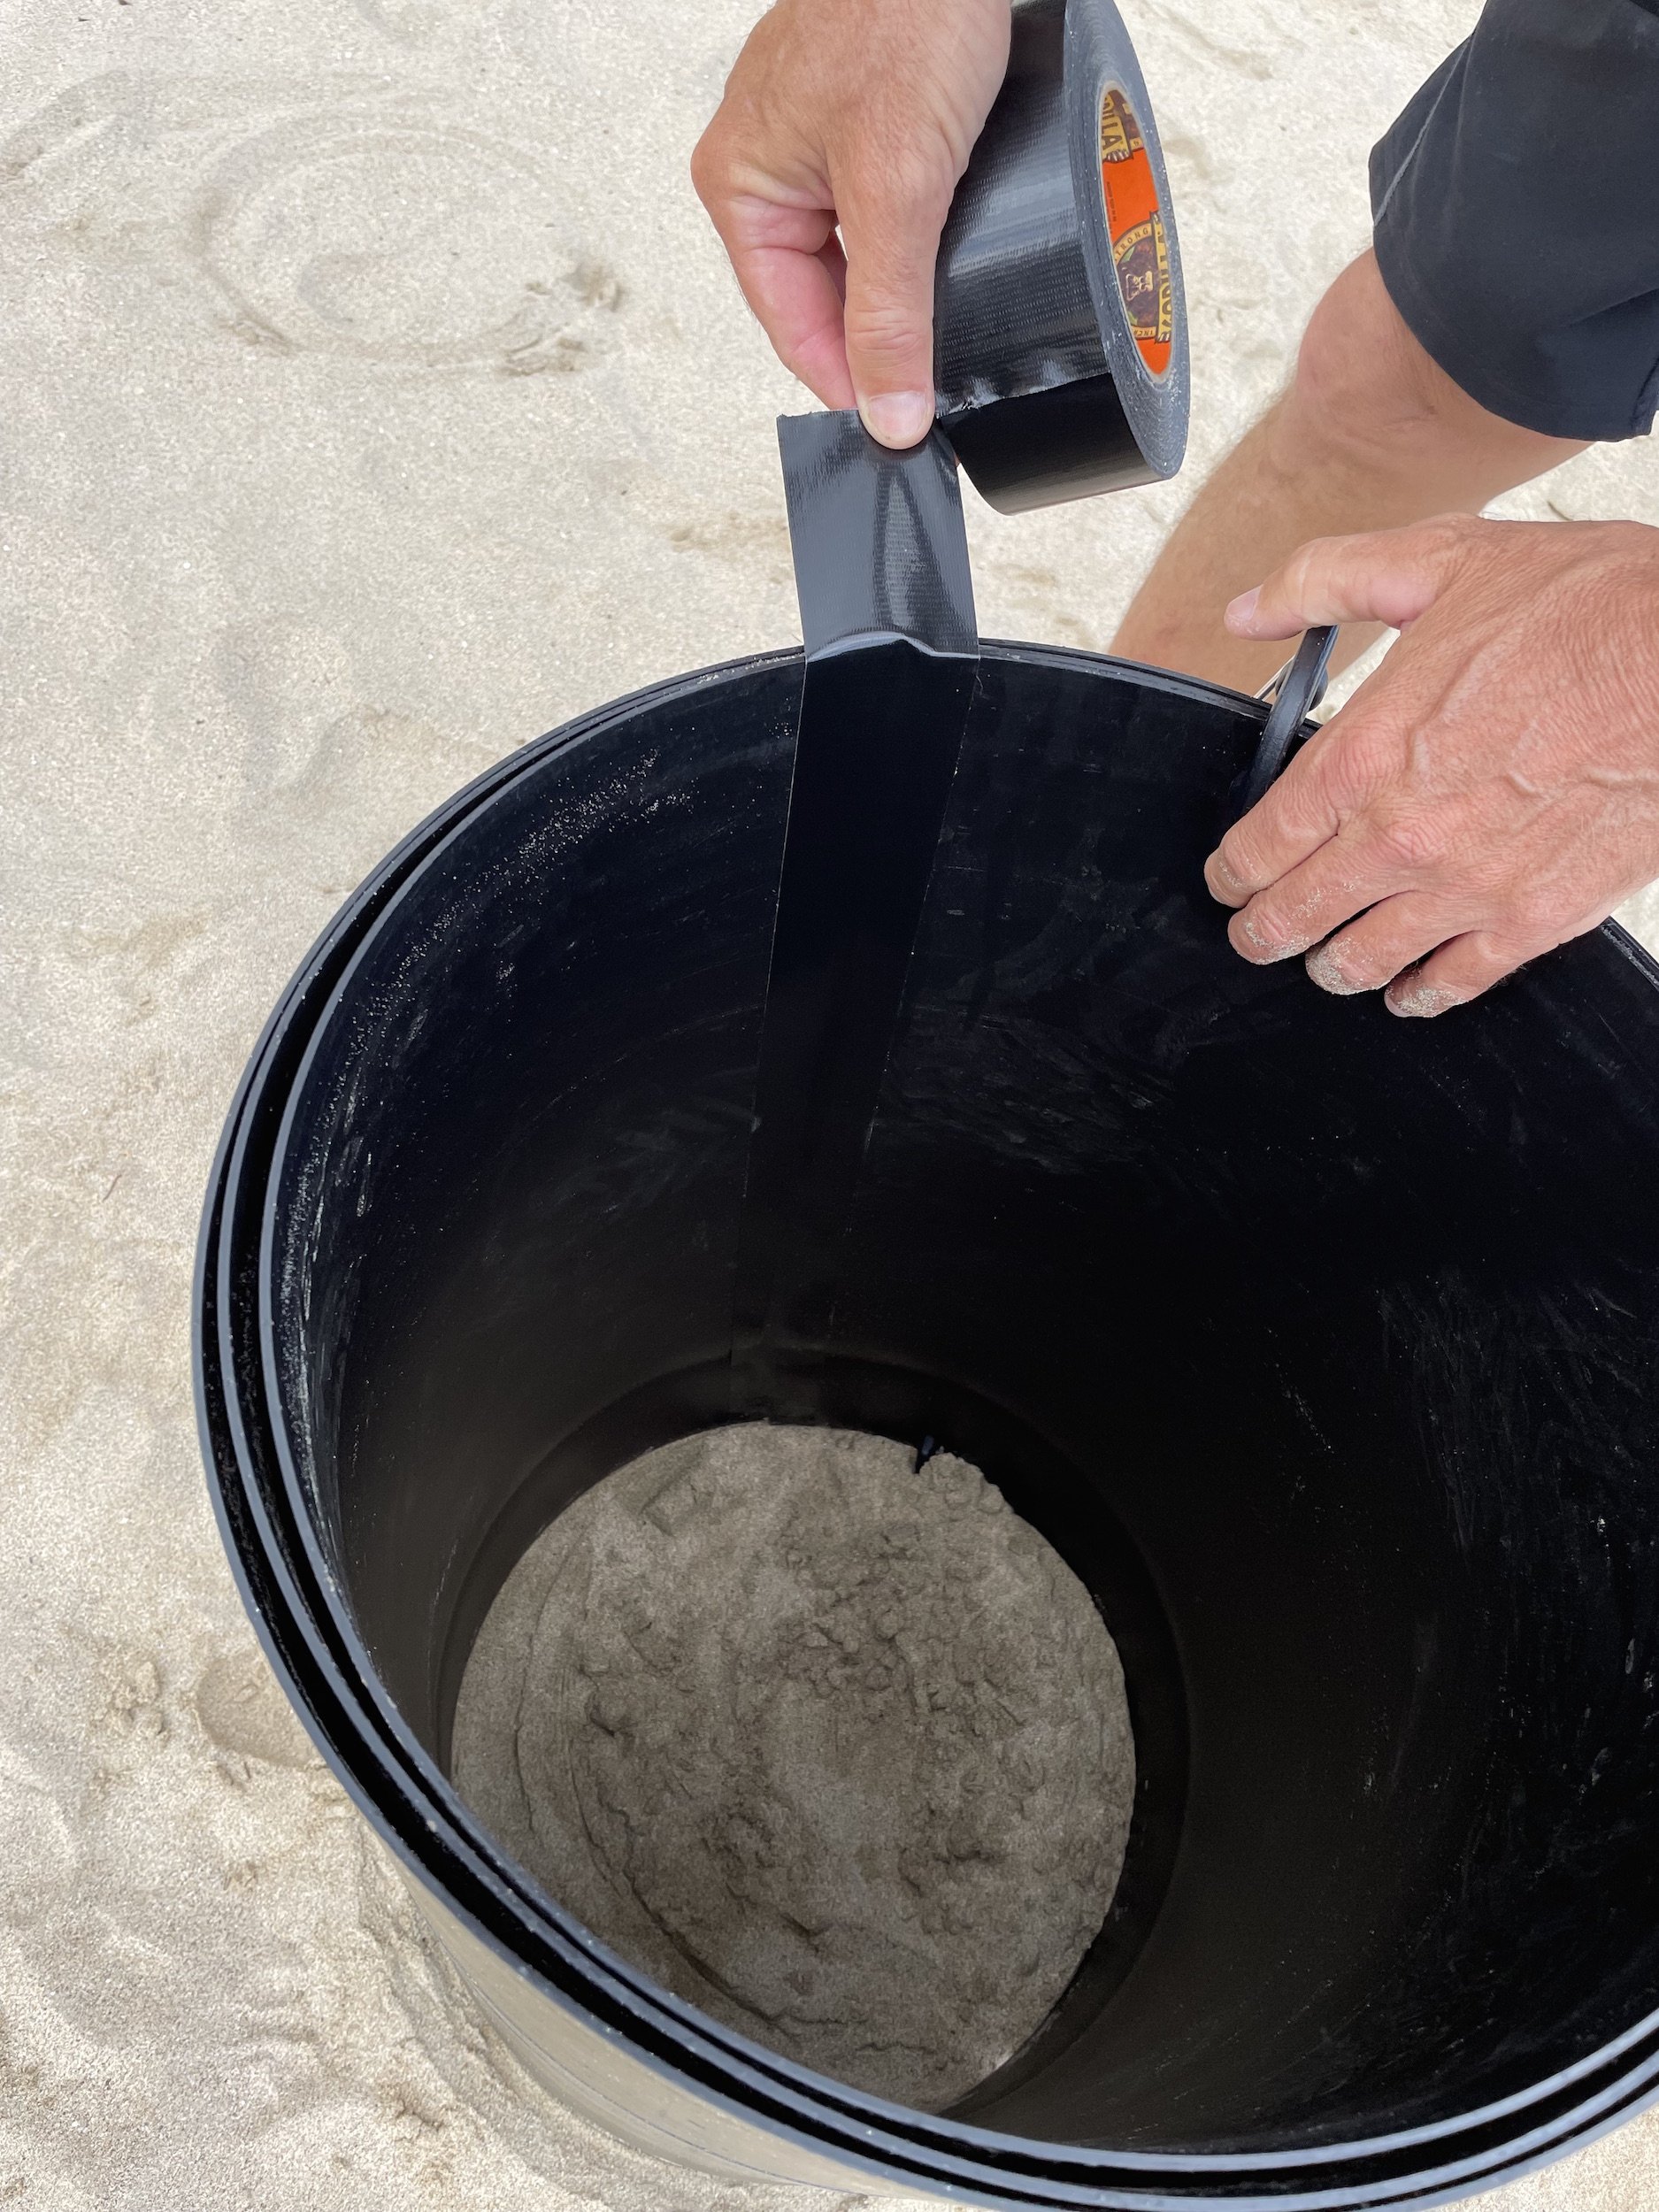 create a sand sculpture using a plastic form at the beach